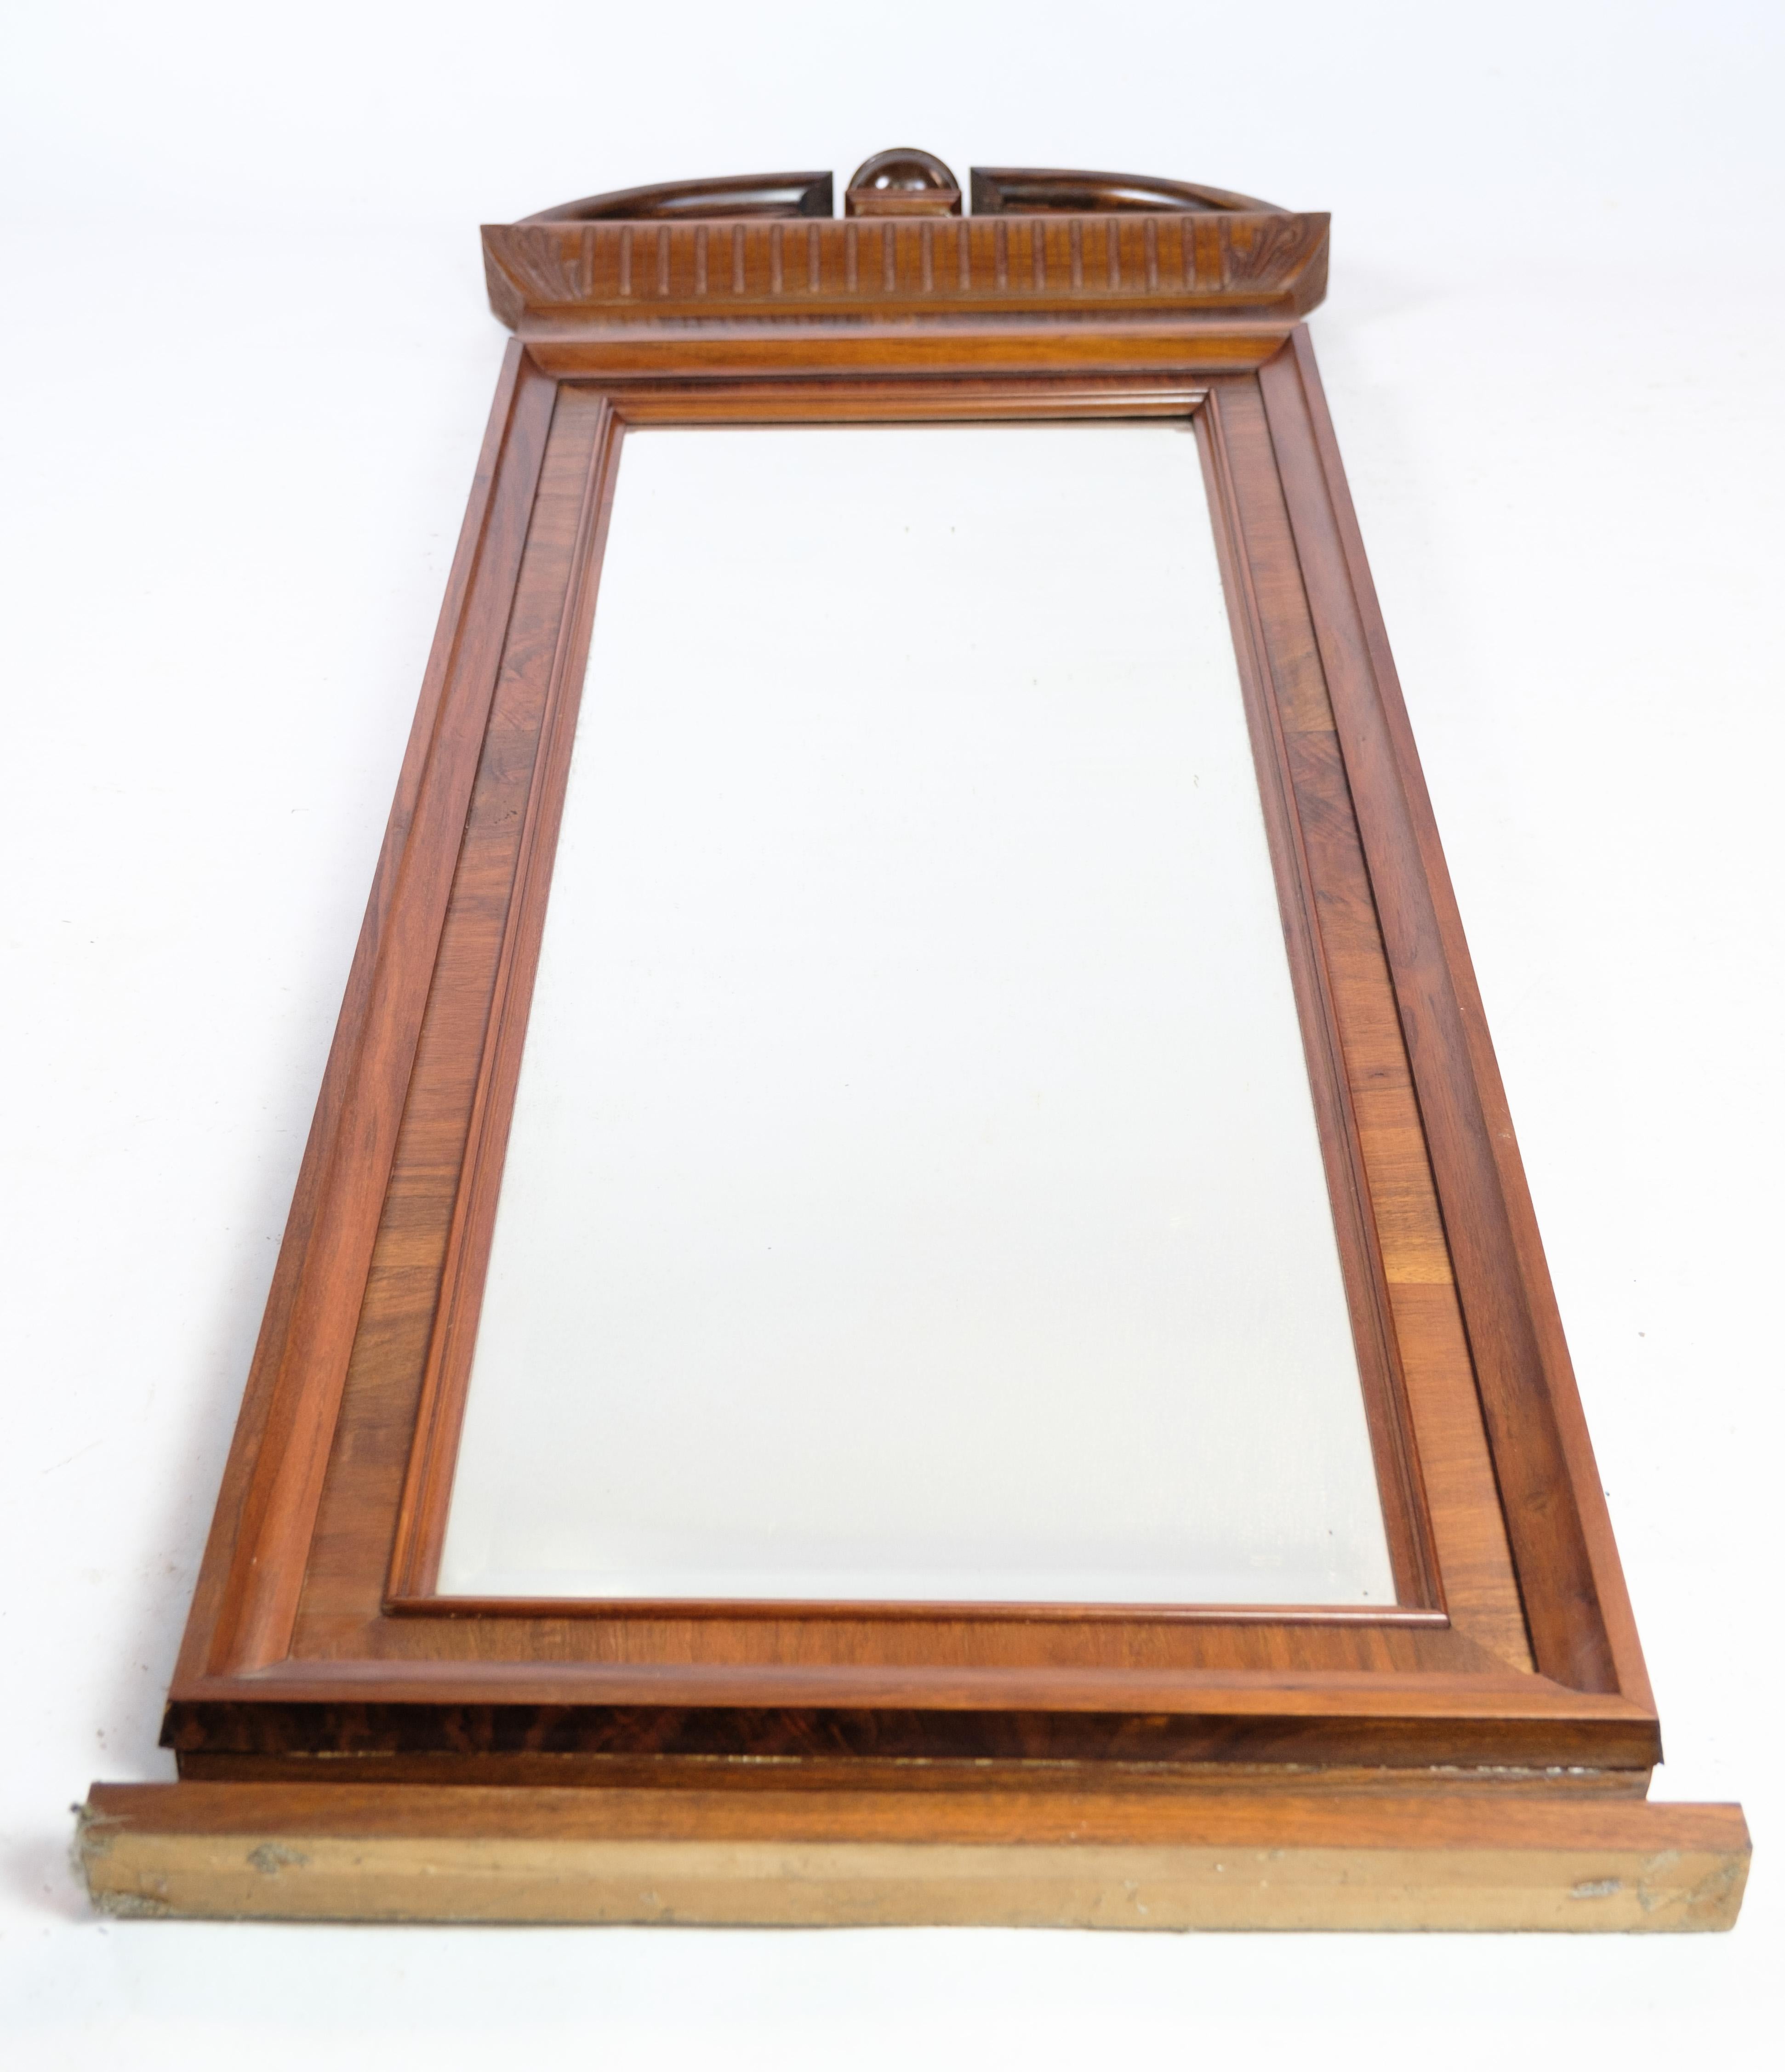 Mirror of hand-polished mahogany, with carvings, made in Denmark from around the 1880s
Measurements in cm: H:183 W:57